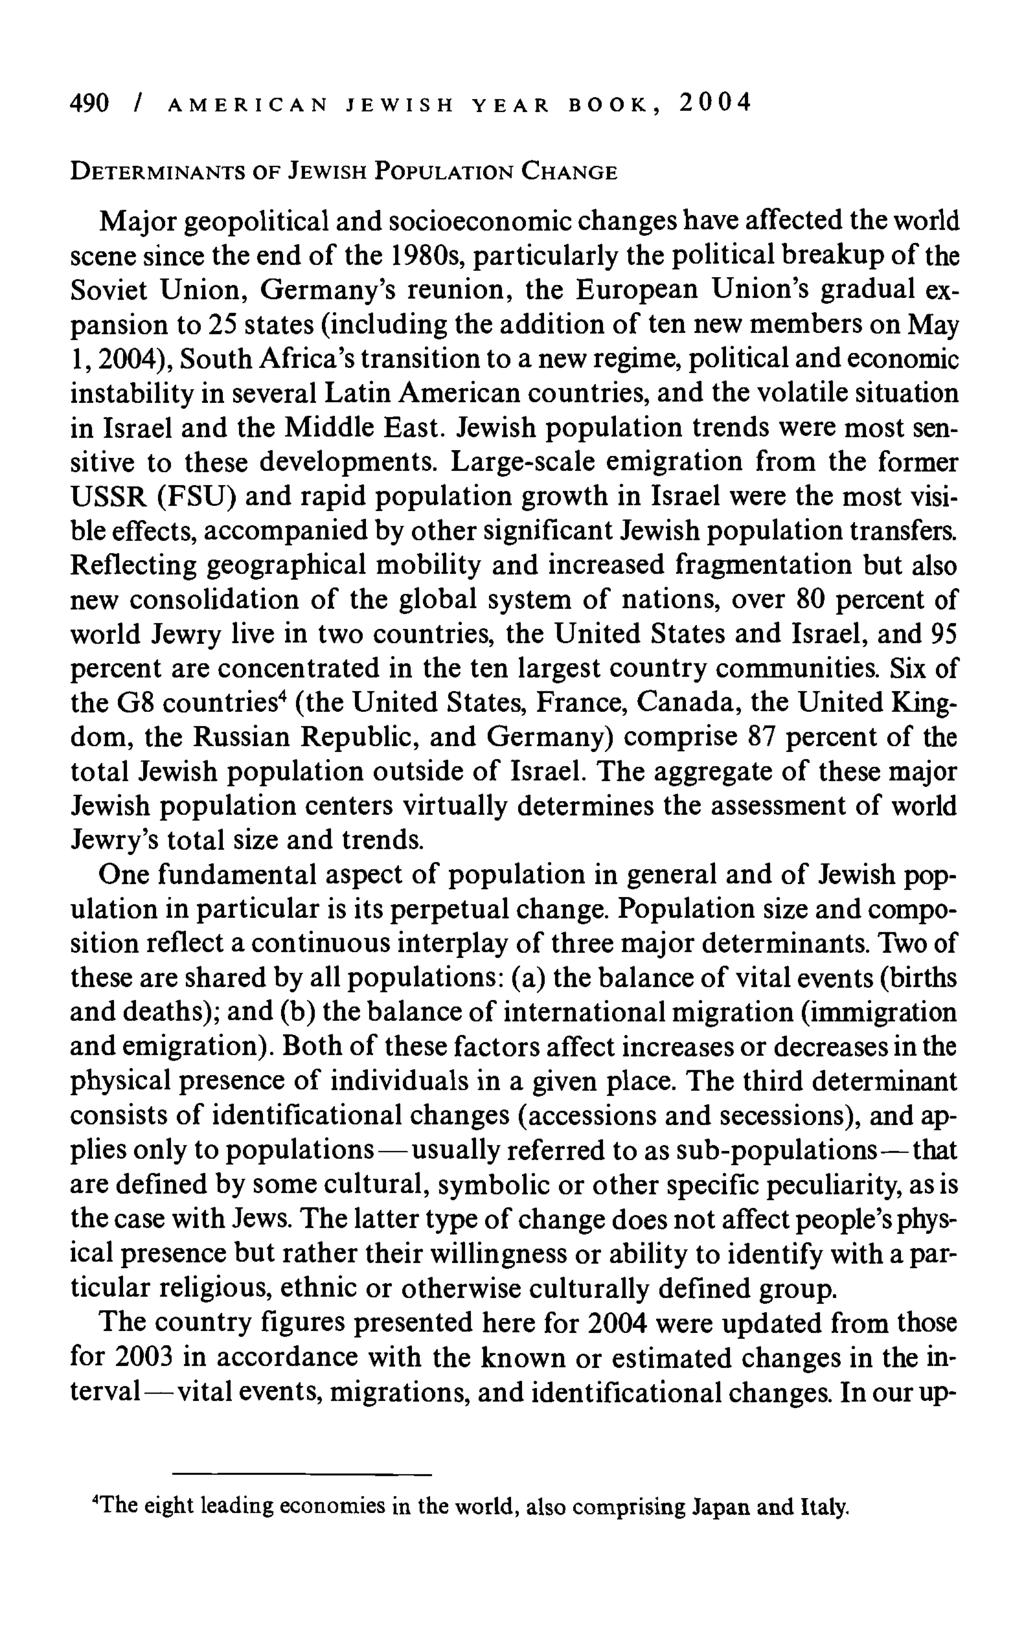 490 / AMERICAN JEWISH YEAR BOOK, 2004 DETERMINANTS OF JEWISH POPULATION CHANGE Major geopolitical and socioeconomic changes have affected the world scene since the end of the 1980s, particularly the